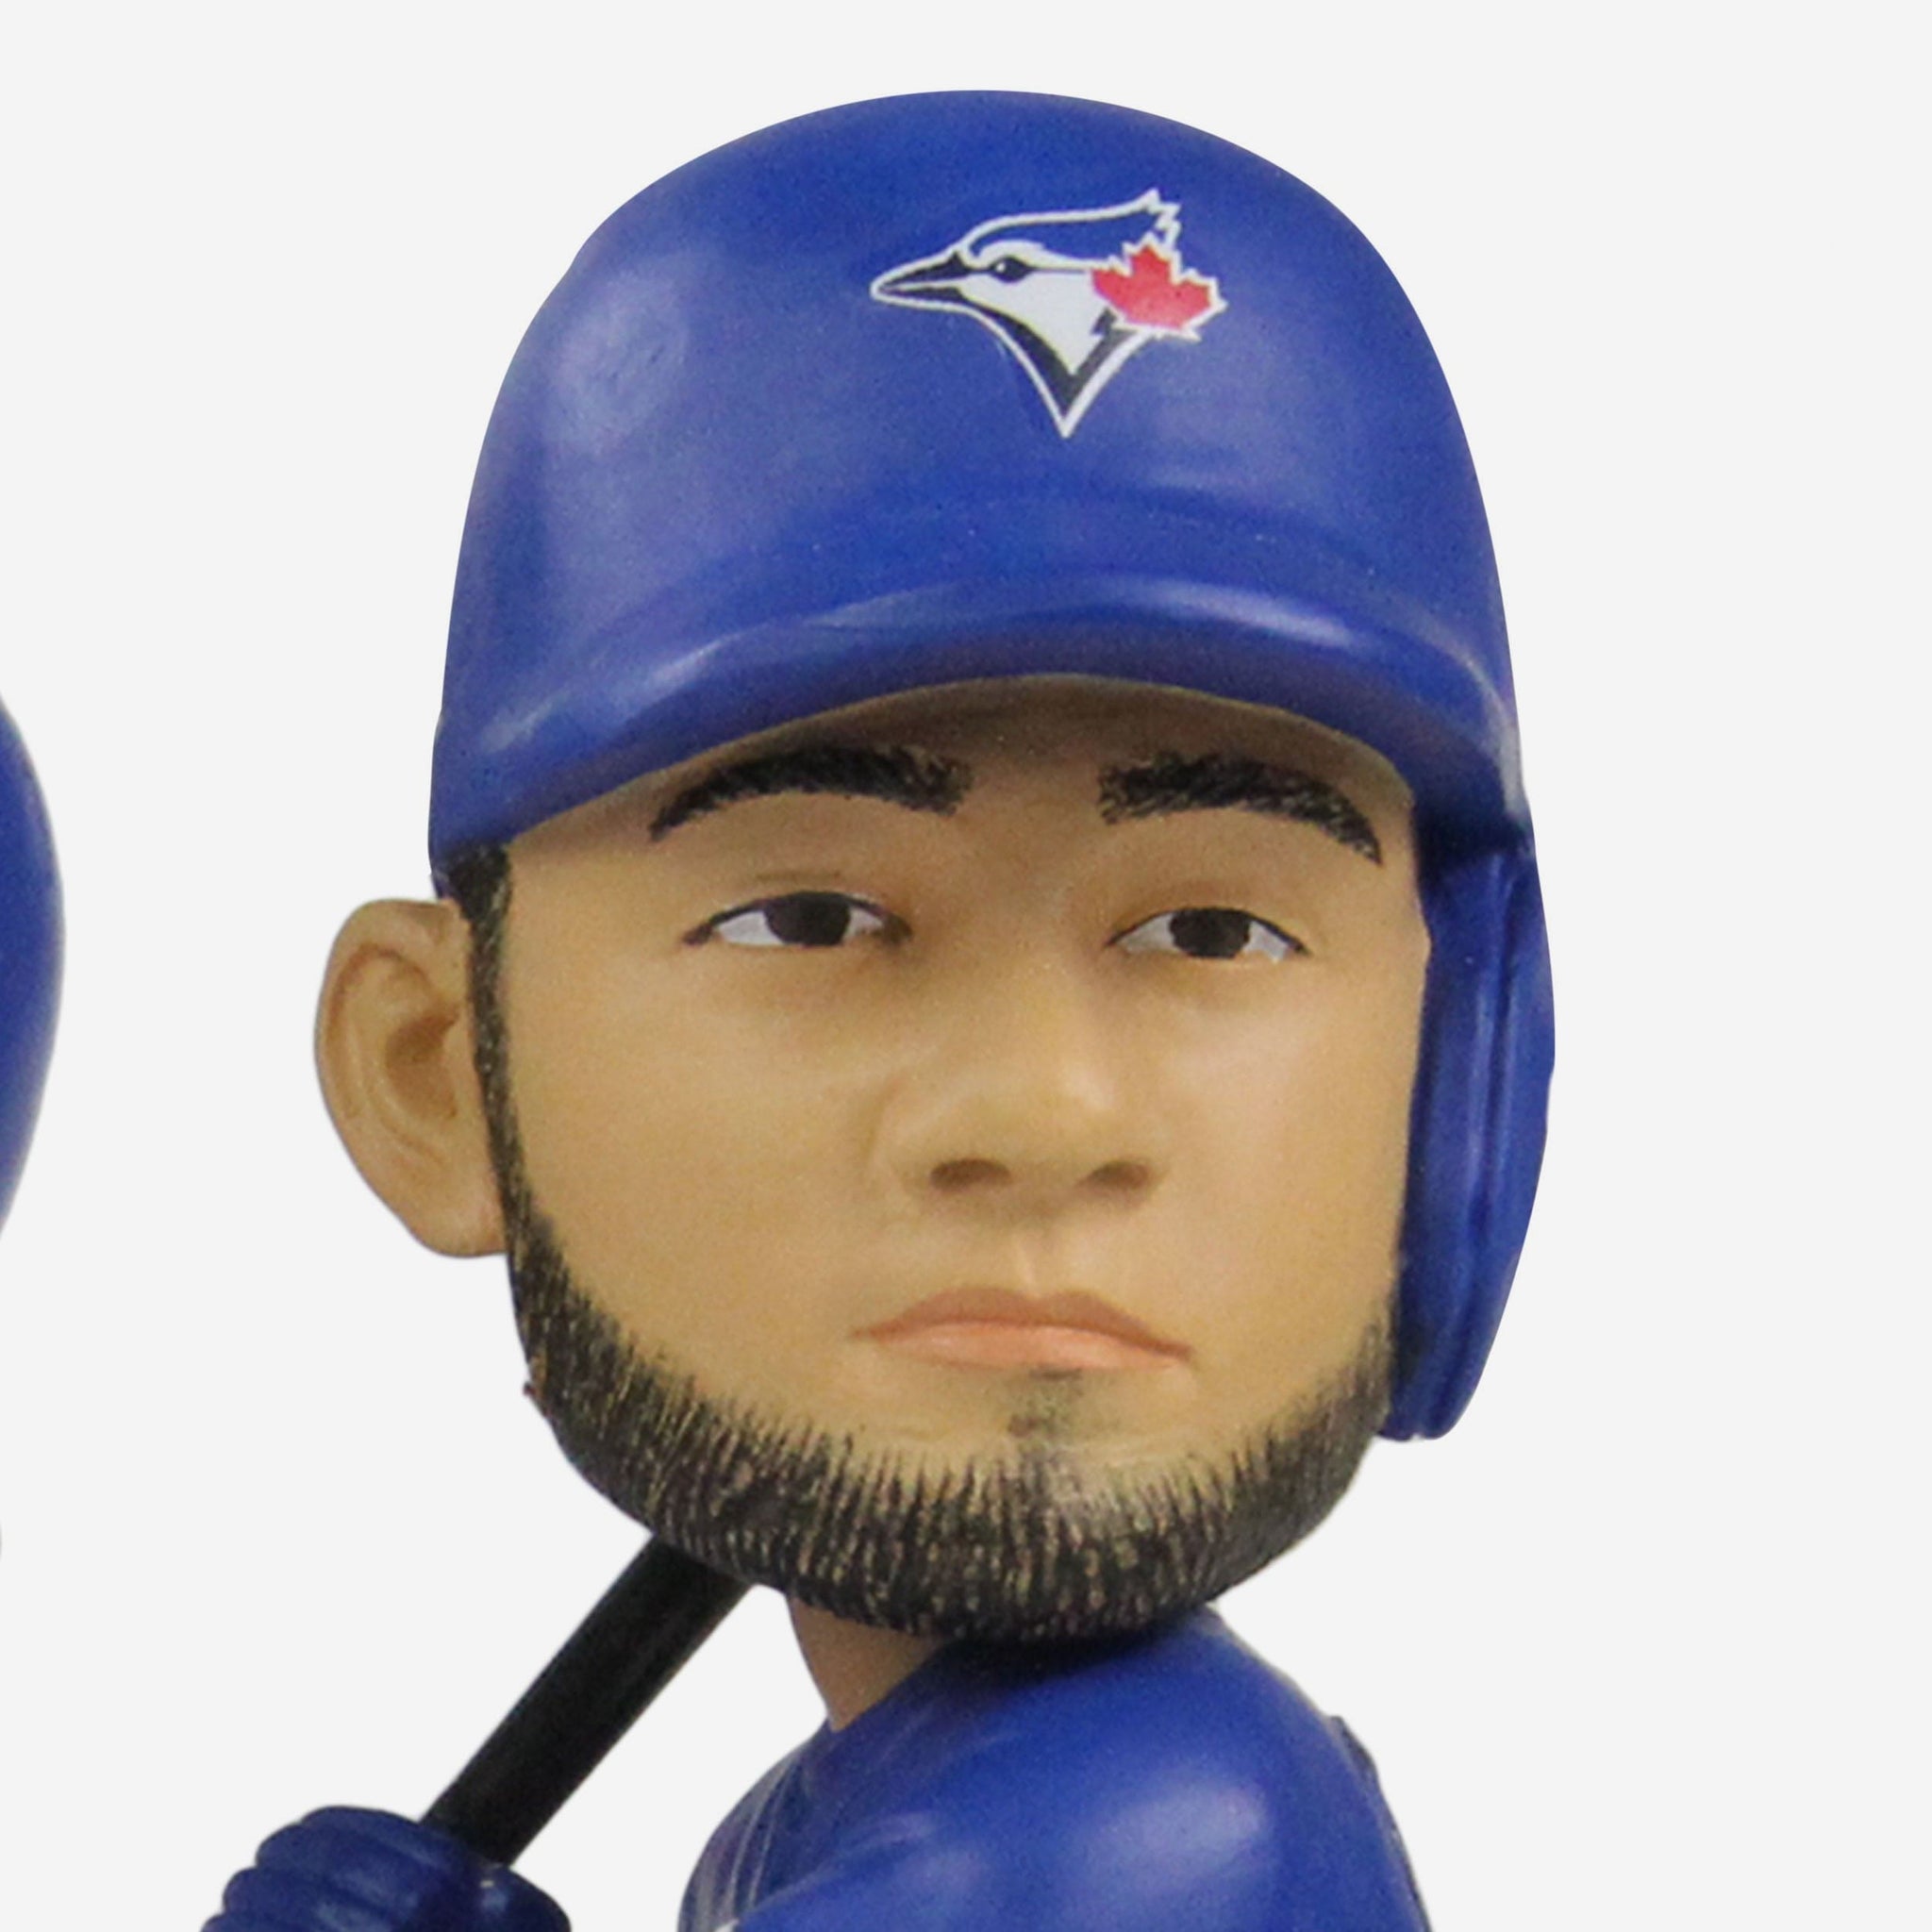 Toronto Blue Jays - The MVP meets Mini-MVP! Josh's bobblehead pres by Pizza  Nova will be handed out to first 20,000 fans through the gates on April 24.